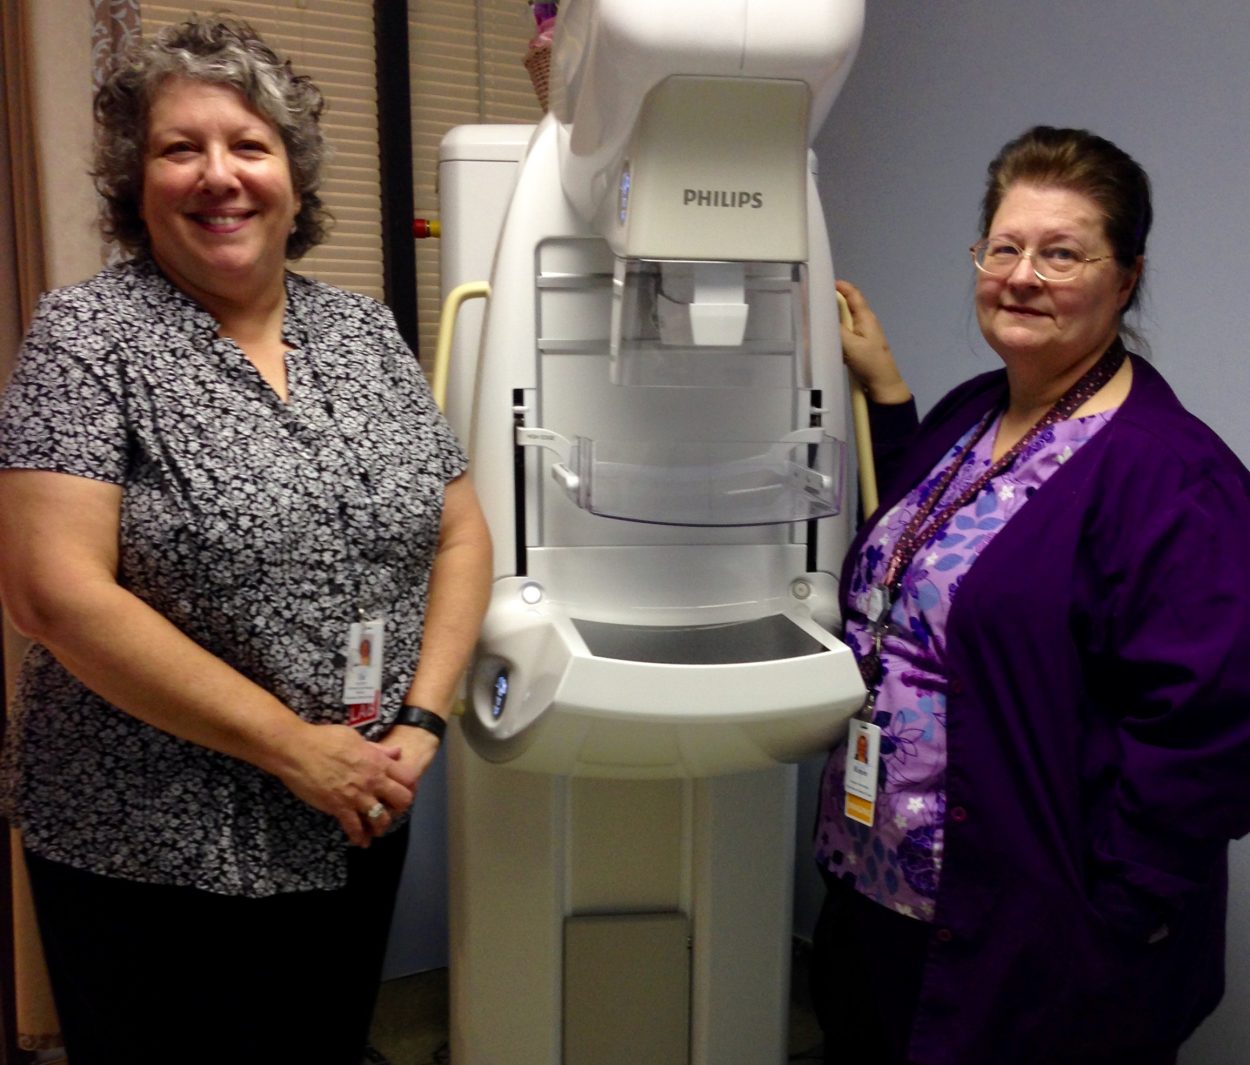 Petersburg’s new mammography machine detects cancer two years earlier